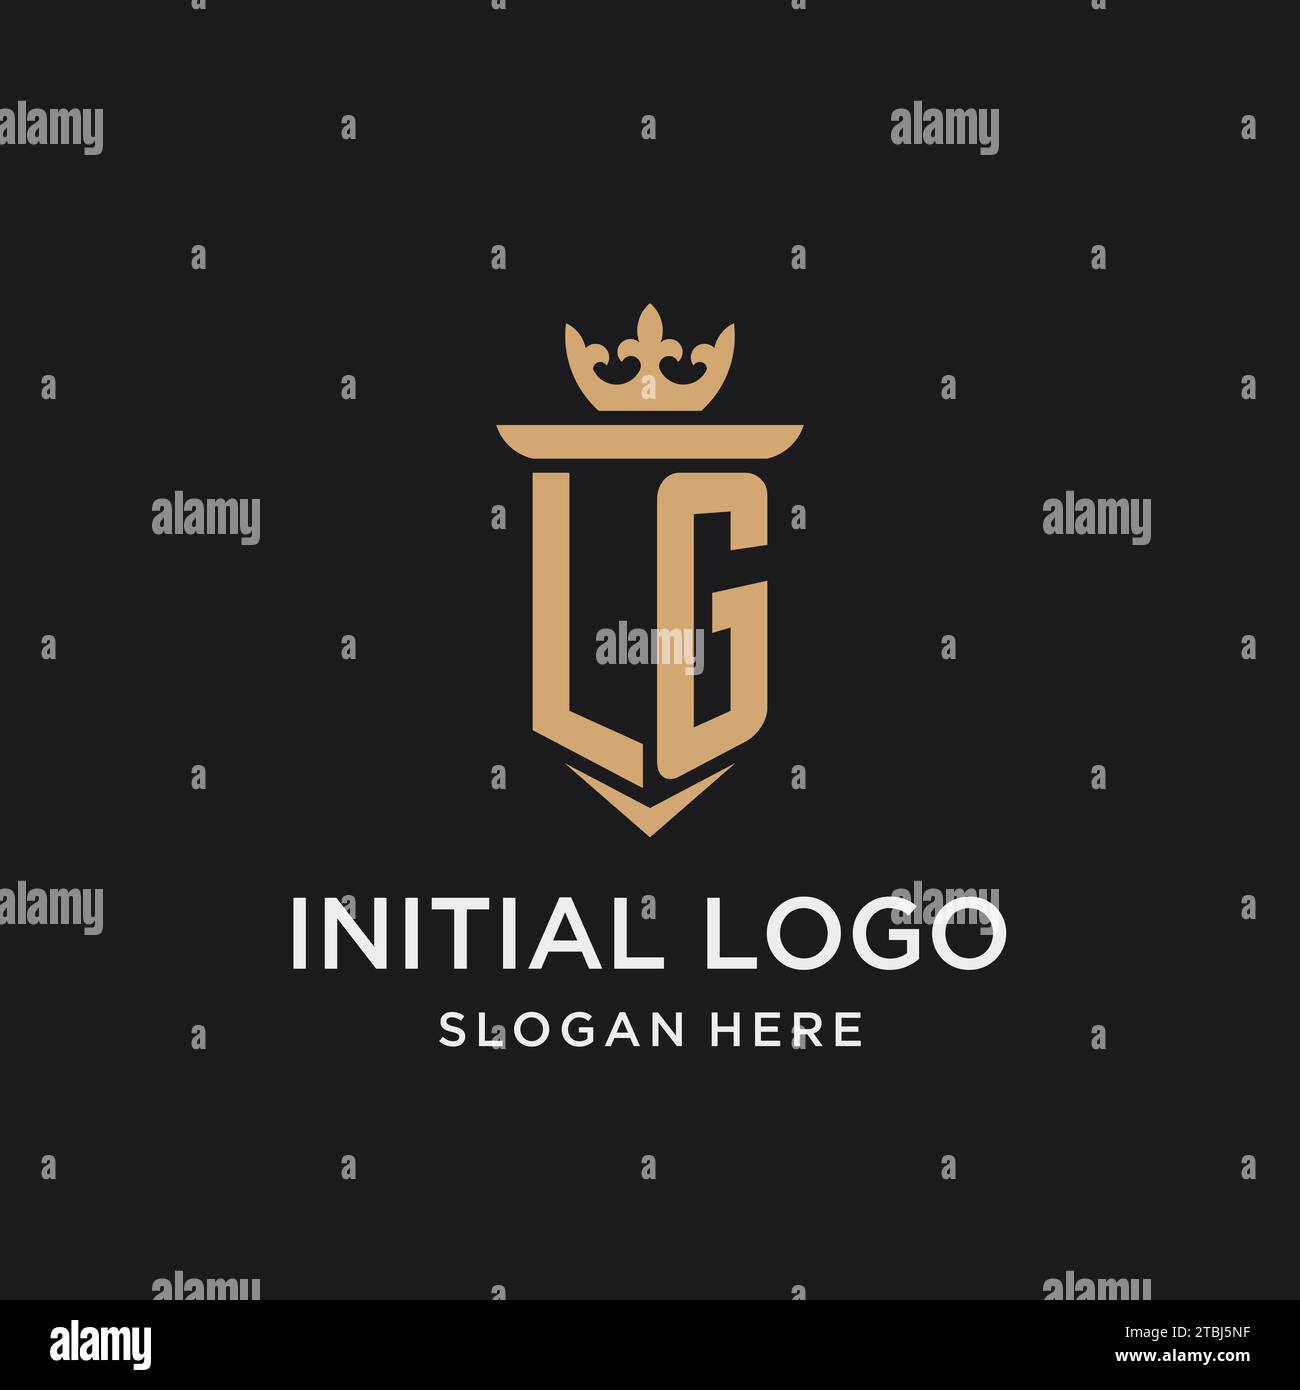 LG monogram with medieval style, luxury and elegant initial logo design ideas Stock Vector